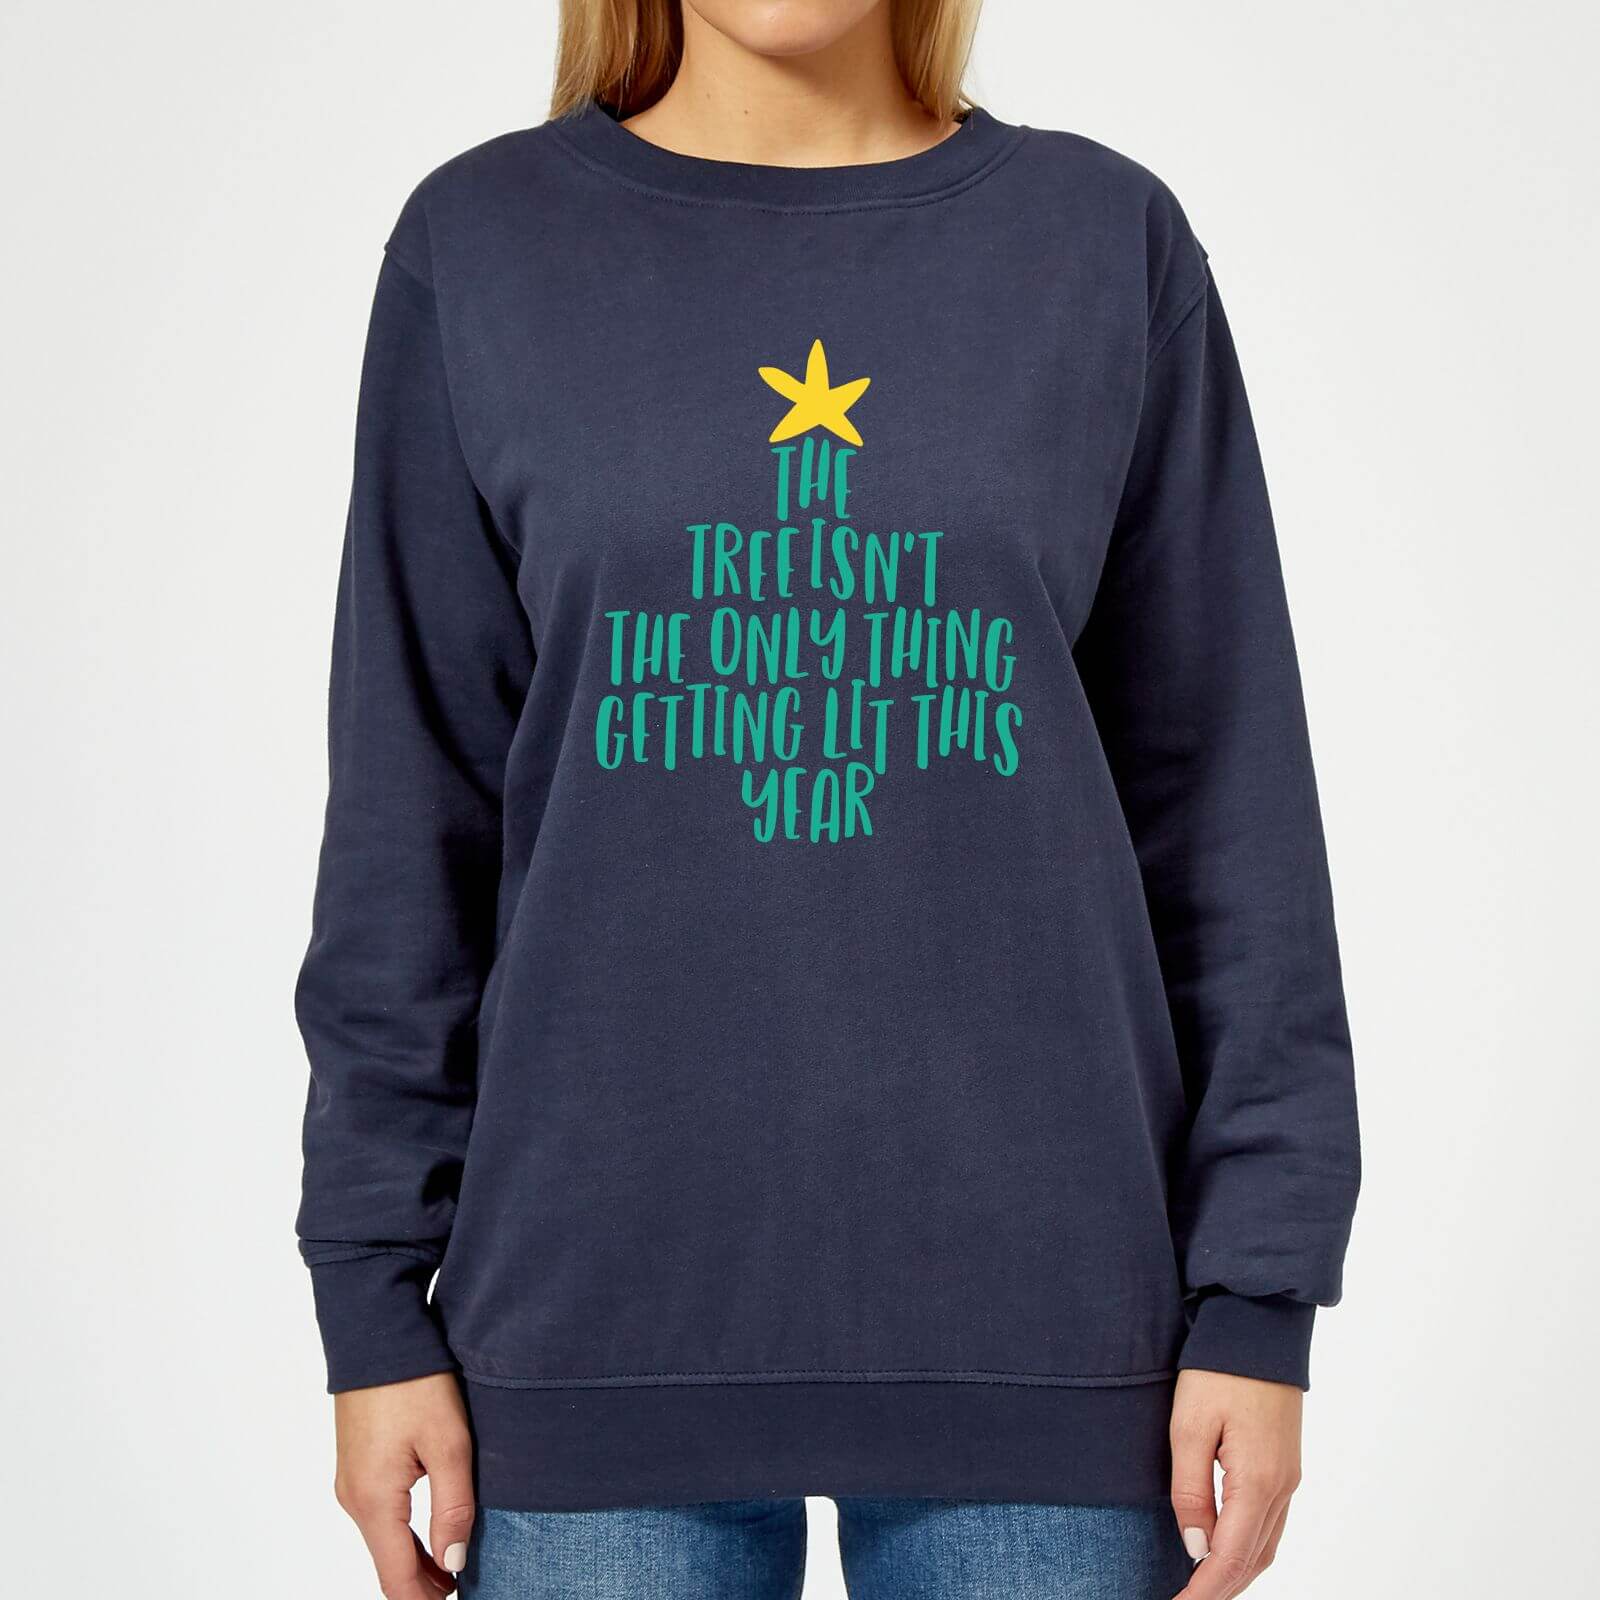 The Tree Isn't The Only Thing Getting Lit This Year Women's Christmas Sweatshirt - Navy - XS - Navy